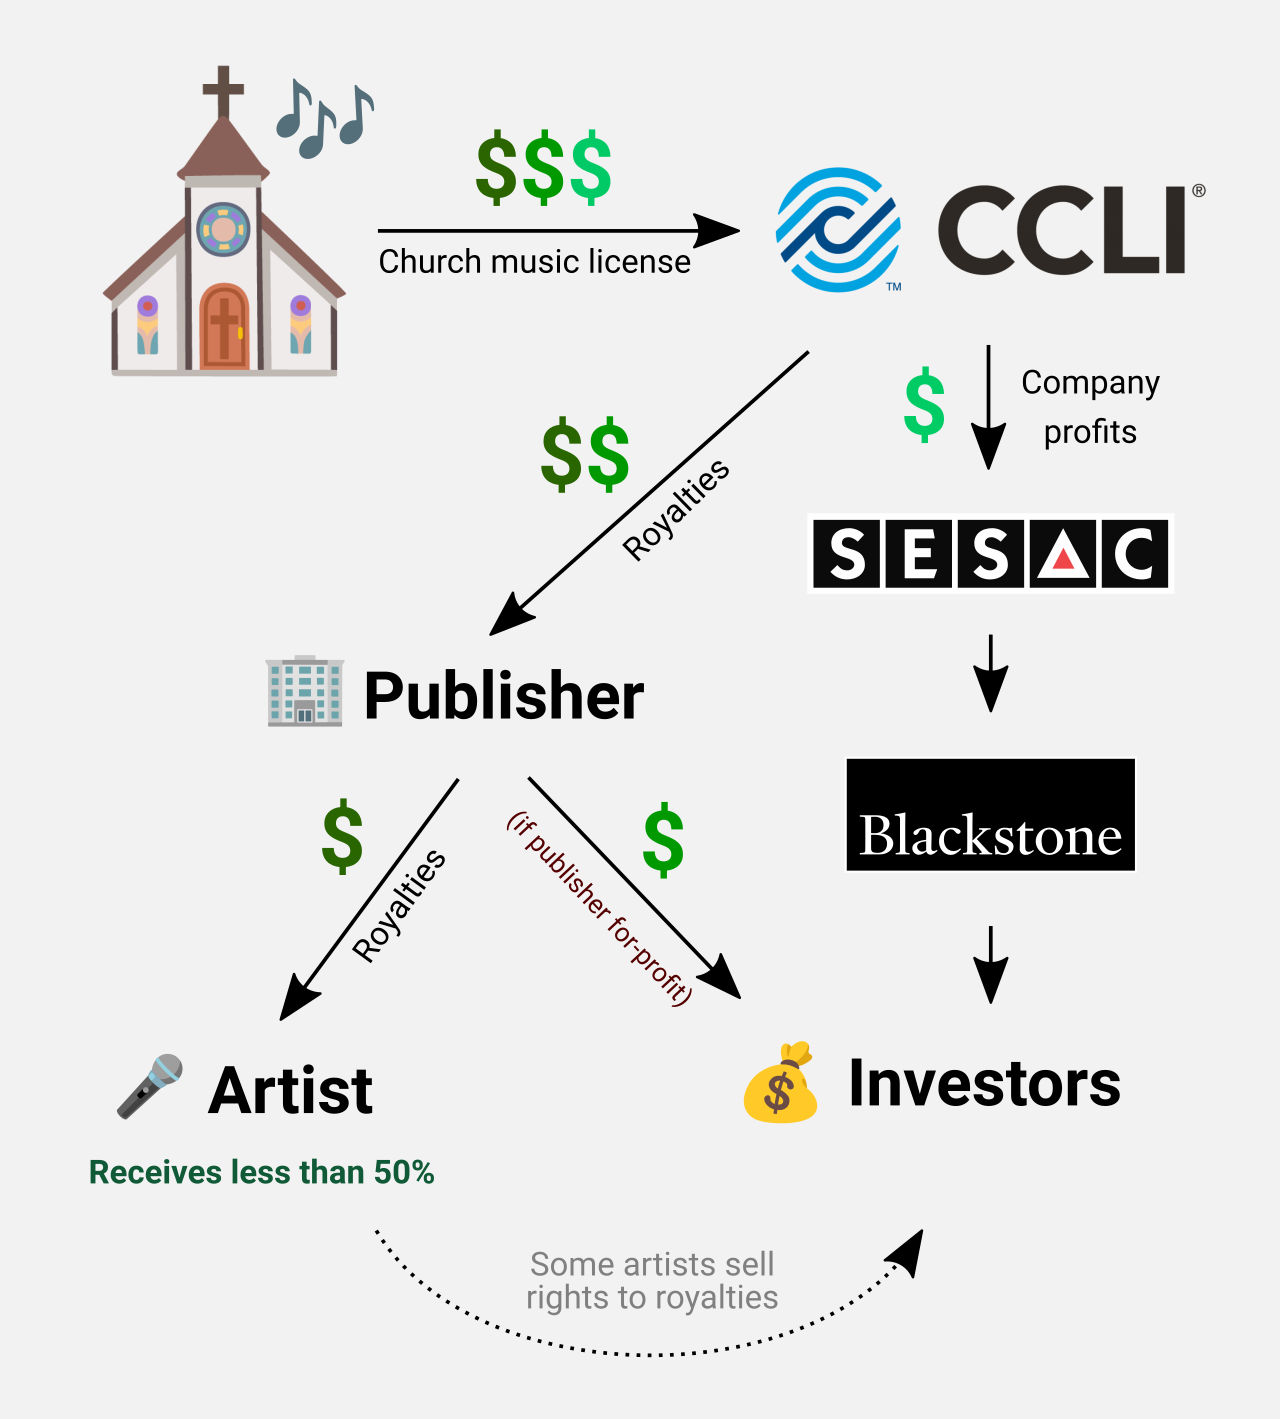 A diagram showing how money from churches ends up going to both artists and investors